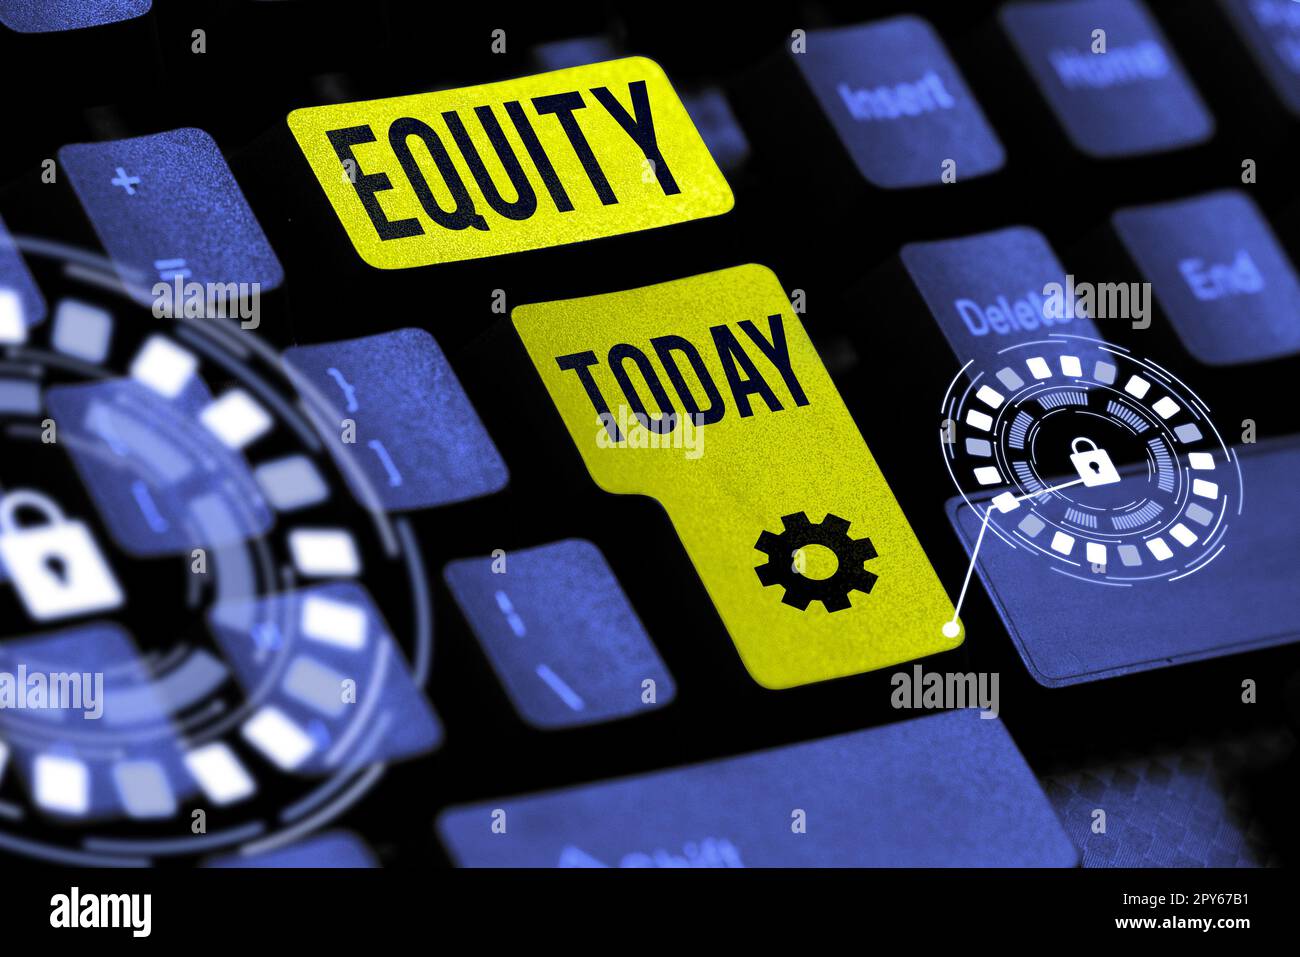 Text caption presenting Equity. Word Written on quality of being fair and impartial race free One hand Unity Stock Photo